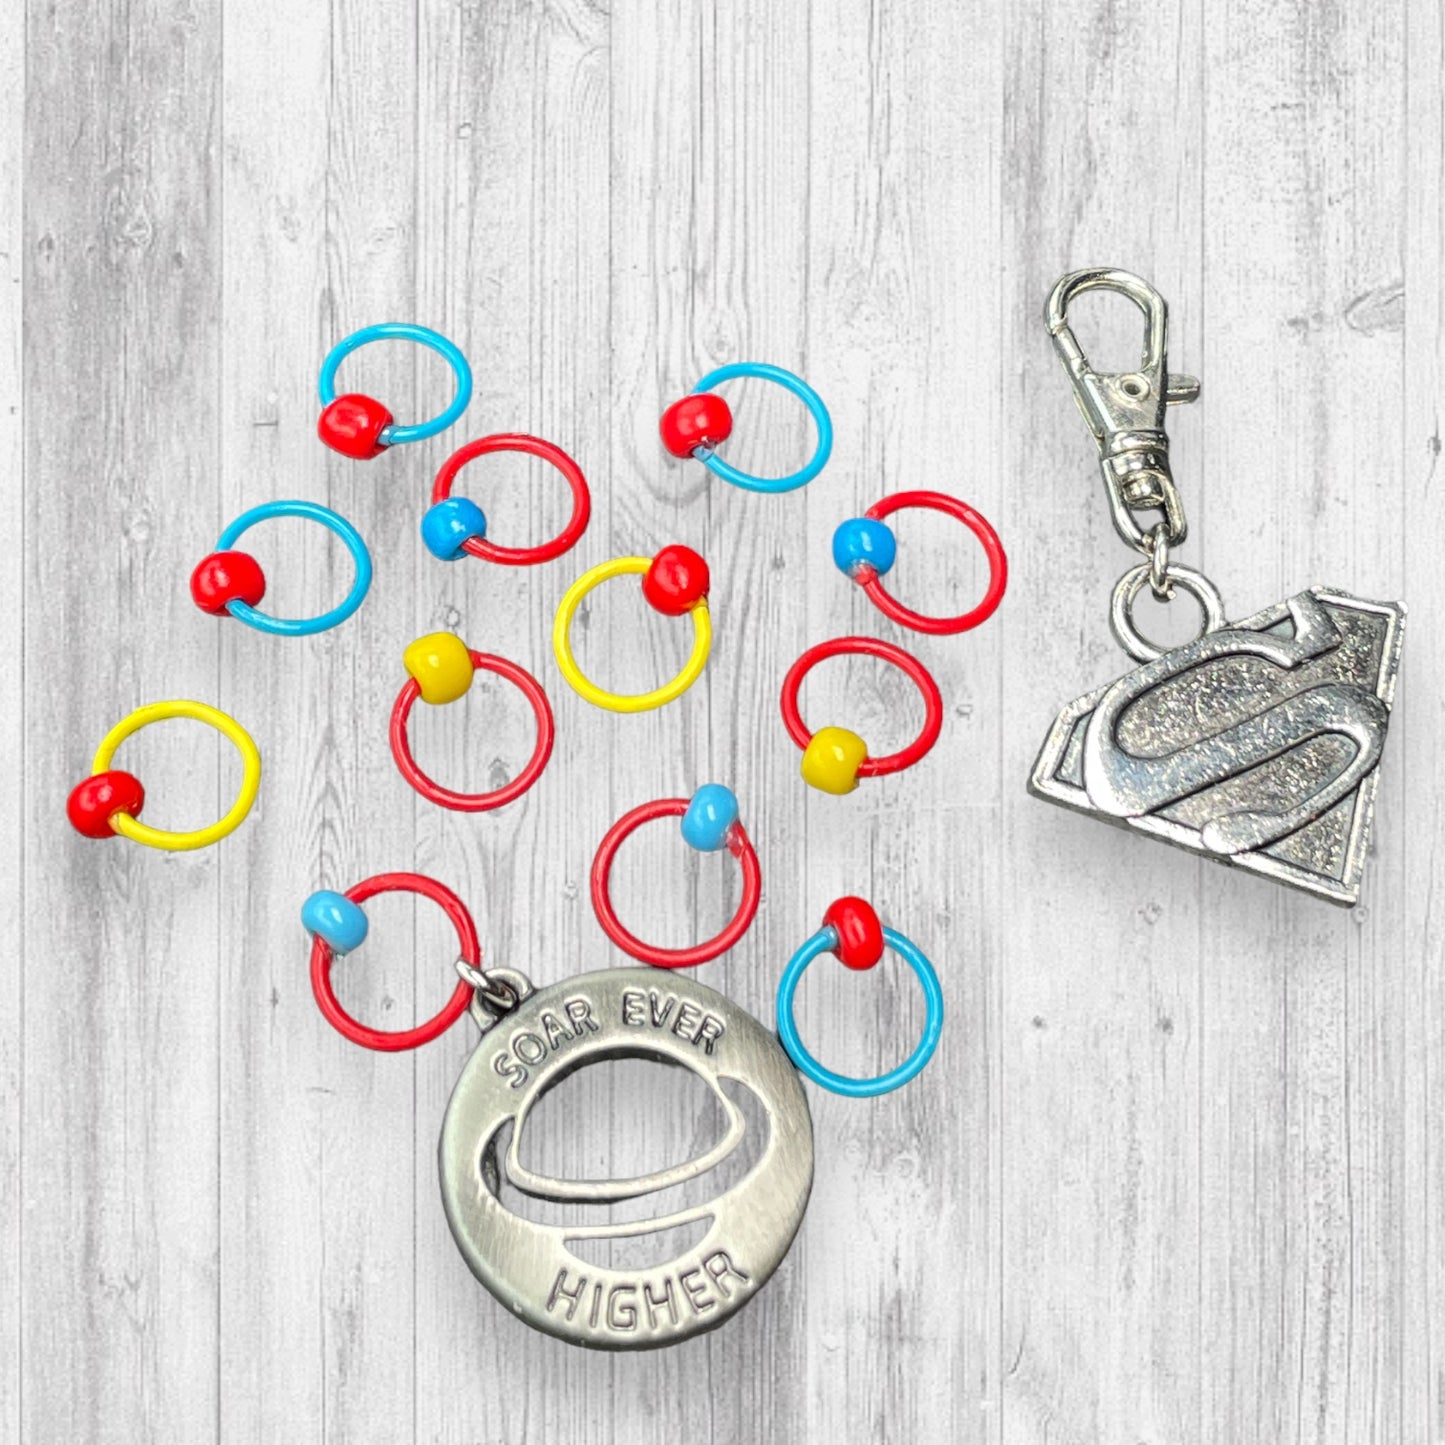 Soar Ever Higher Progress and Stitch Markers - AdoreKnit